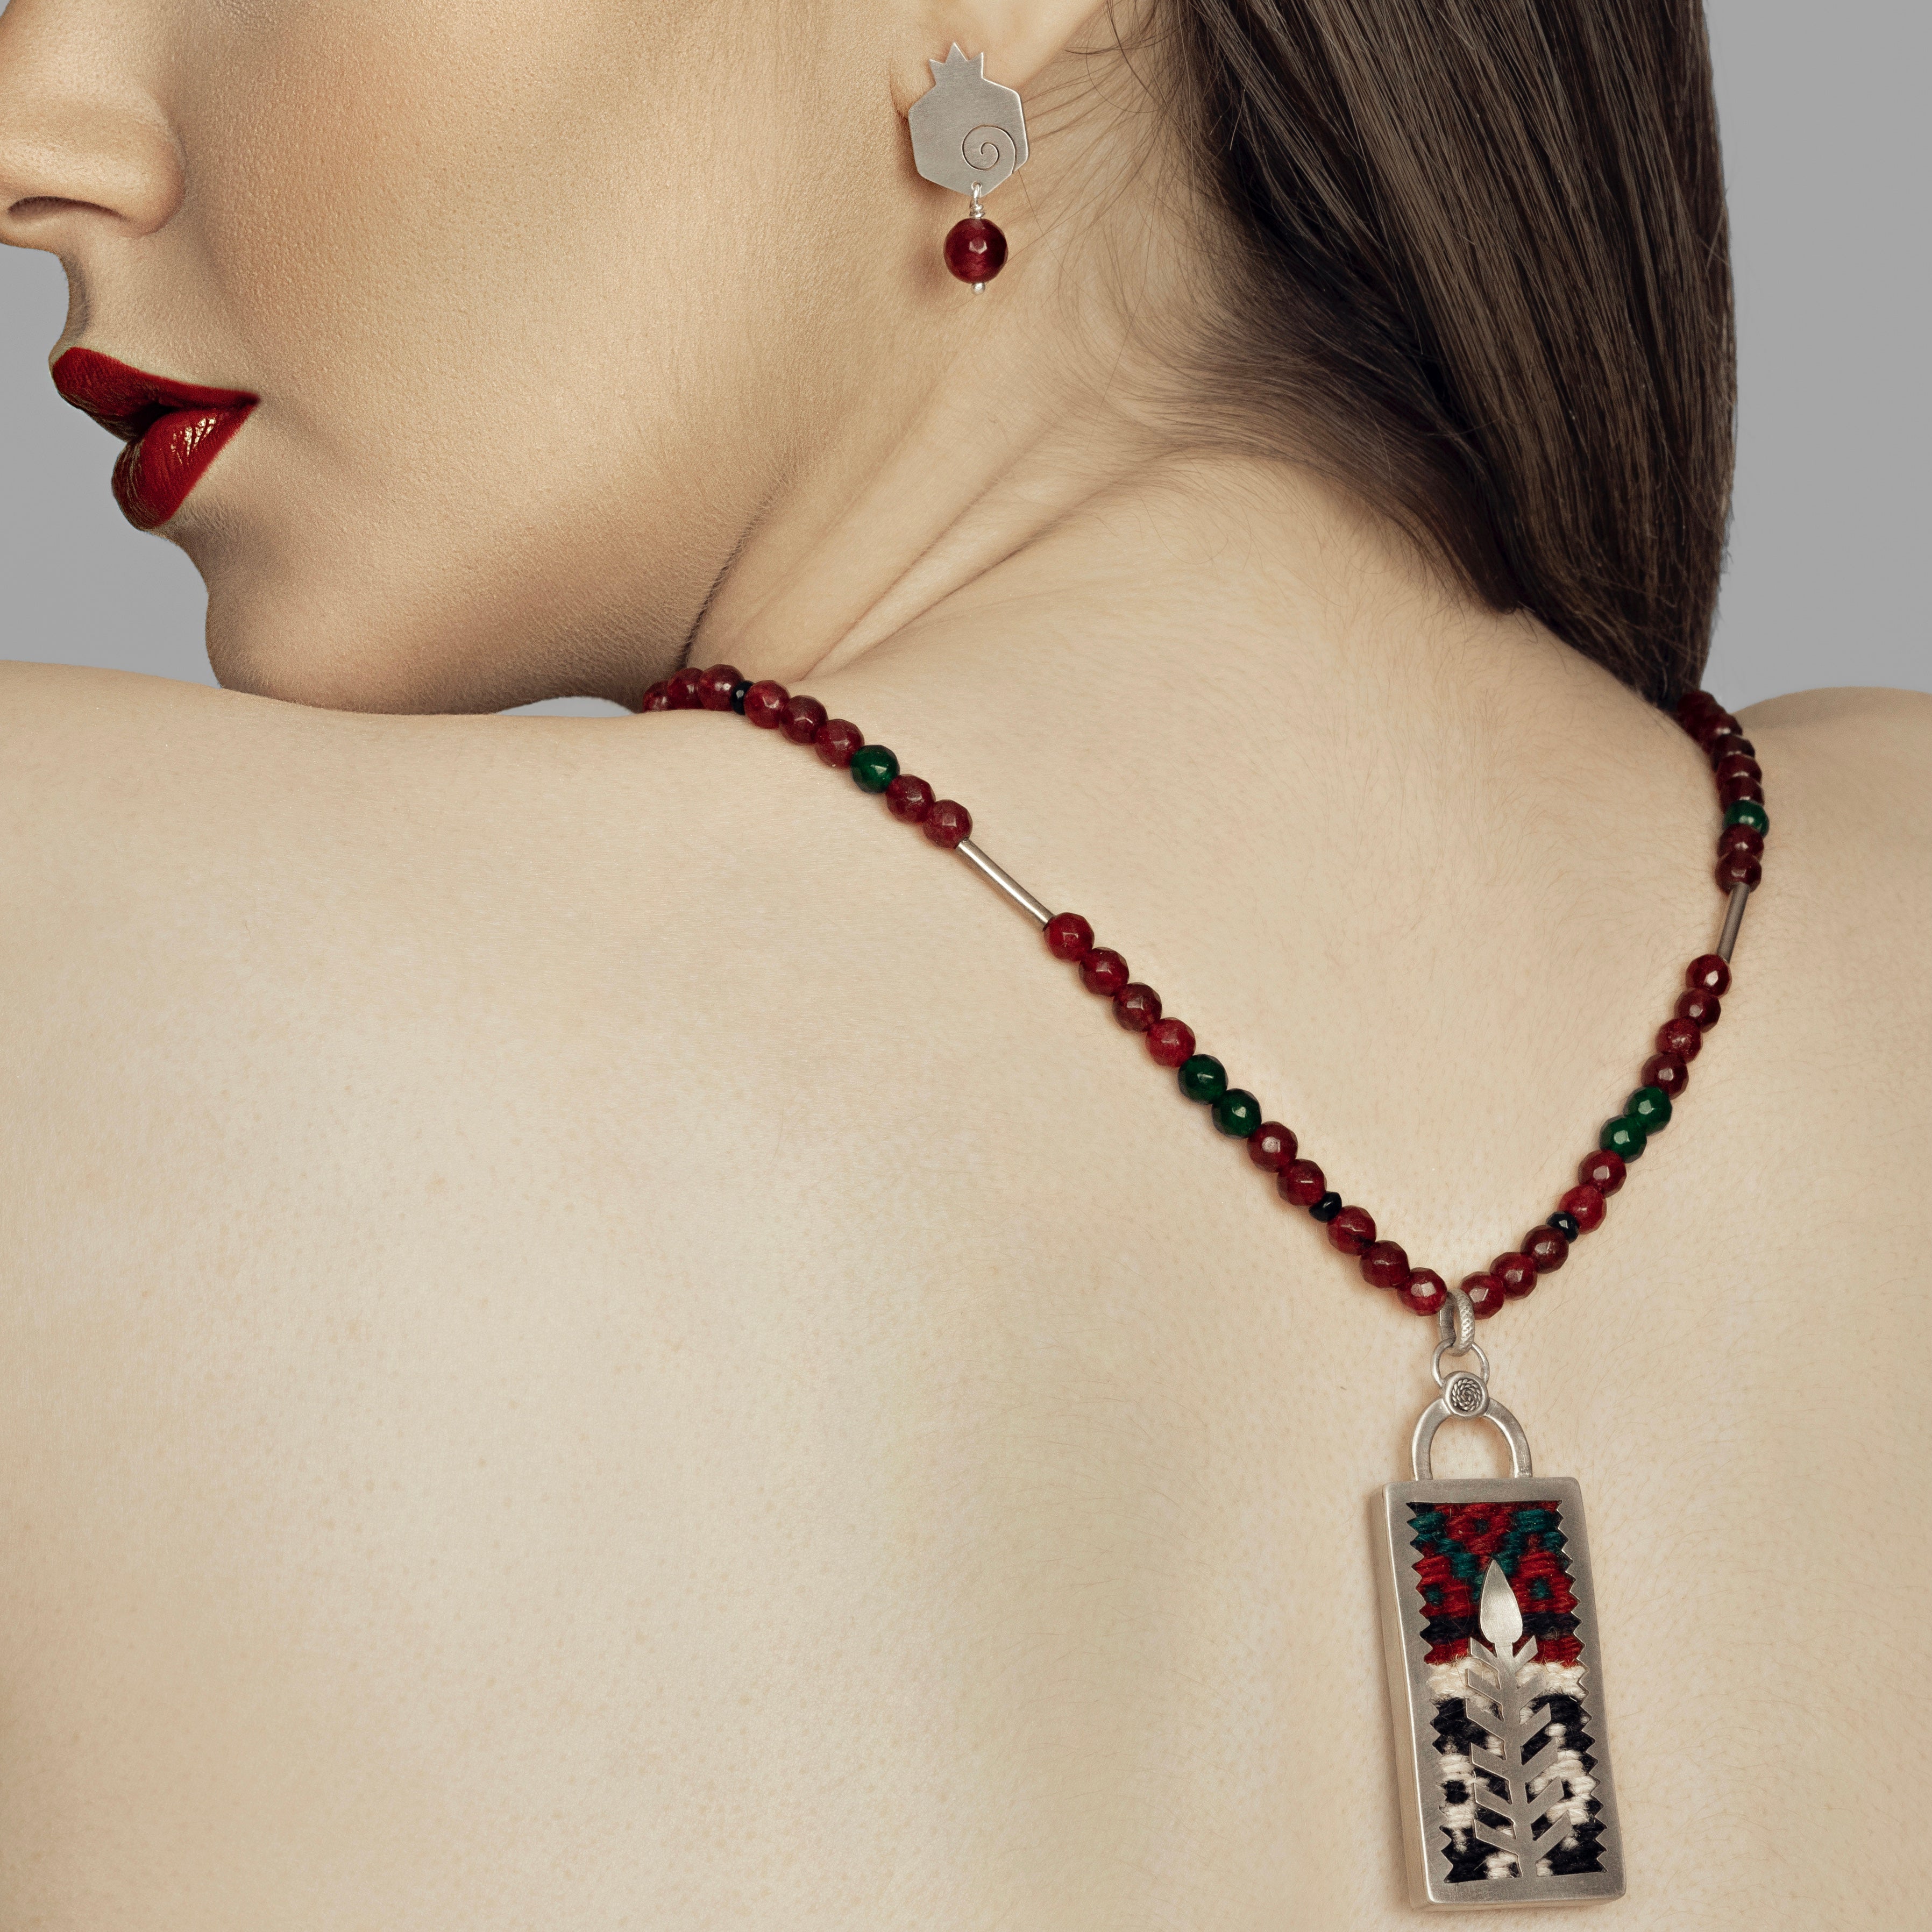 Persian Necklaces Handmade Colorful Silver Necklace Embellished with Kilim:Persian Jewelry-A ART GALLERY